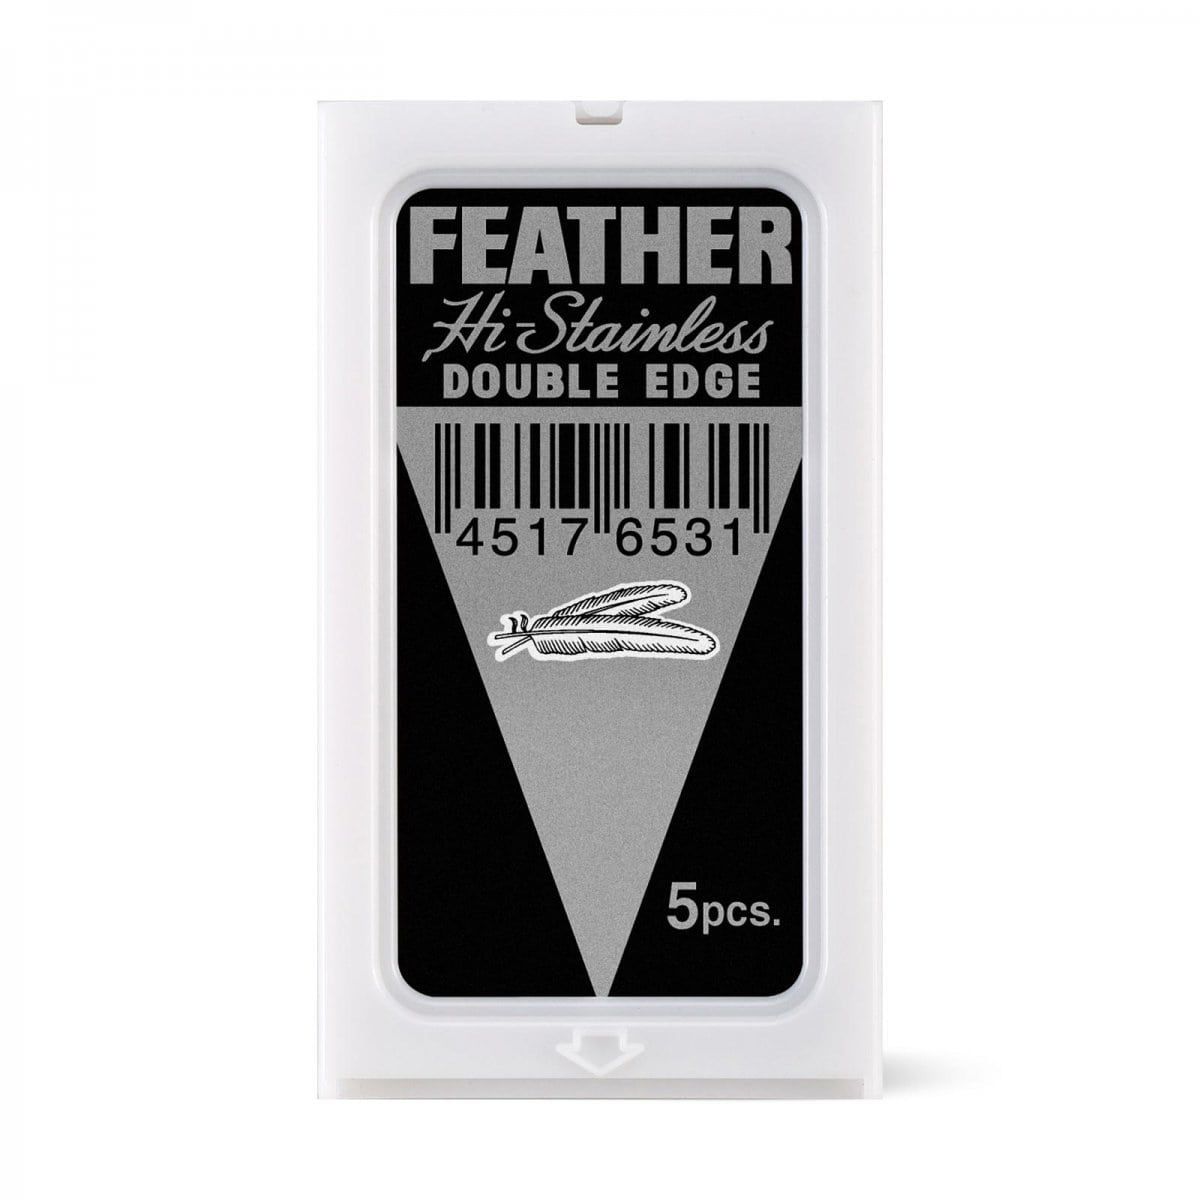 FEATHER DOUBLE RAZOR BLADE 5 PACK